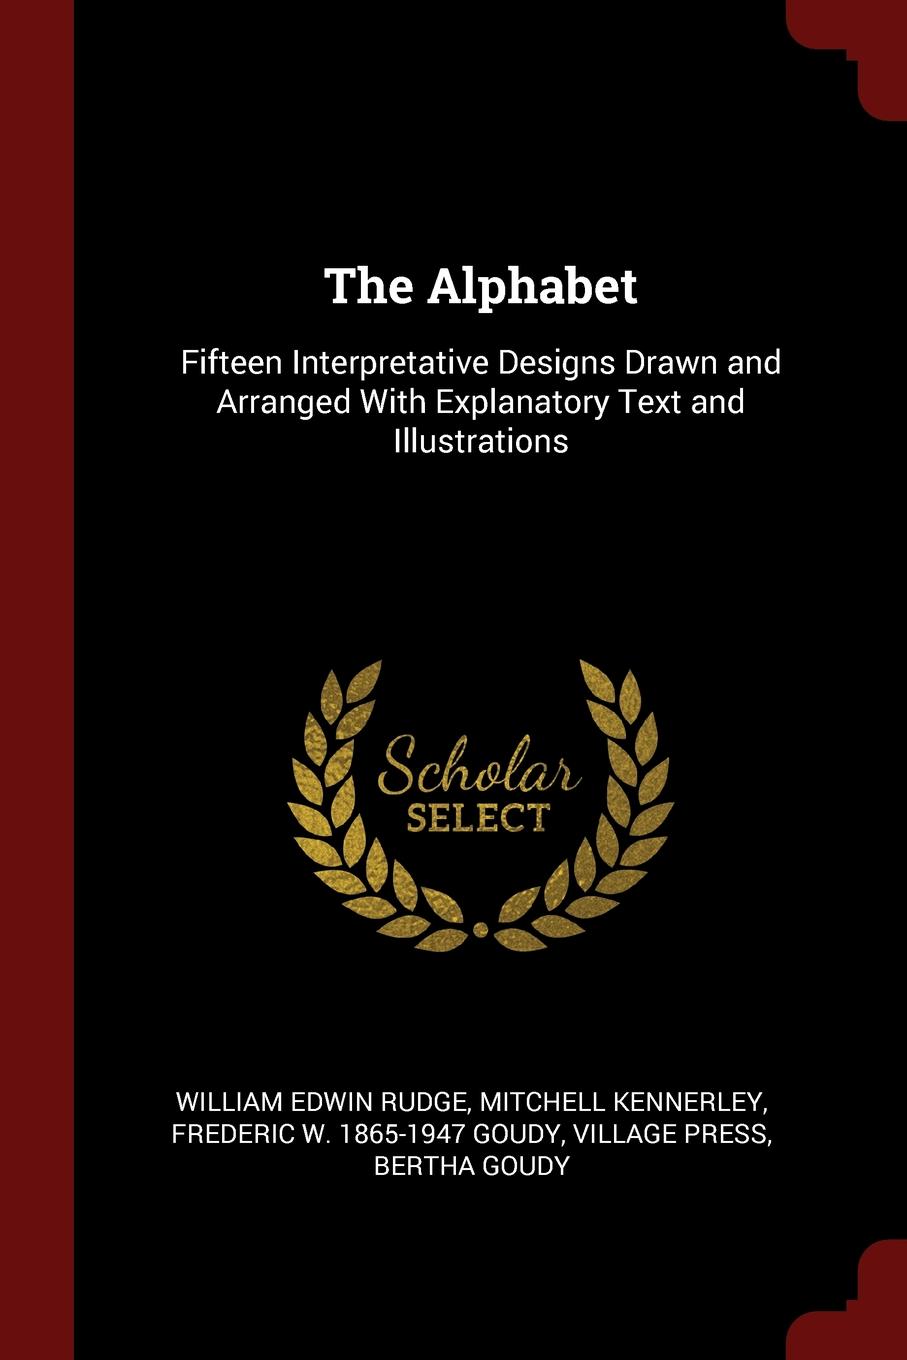 The Alphabet. Fifteen Interpretative Designs Drawn and Arranged With Explanatory Text and Illustrations